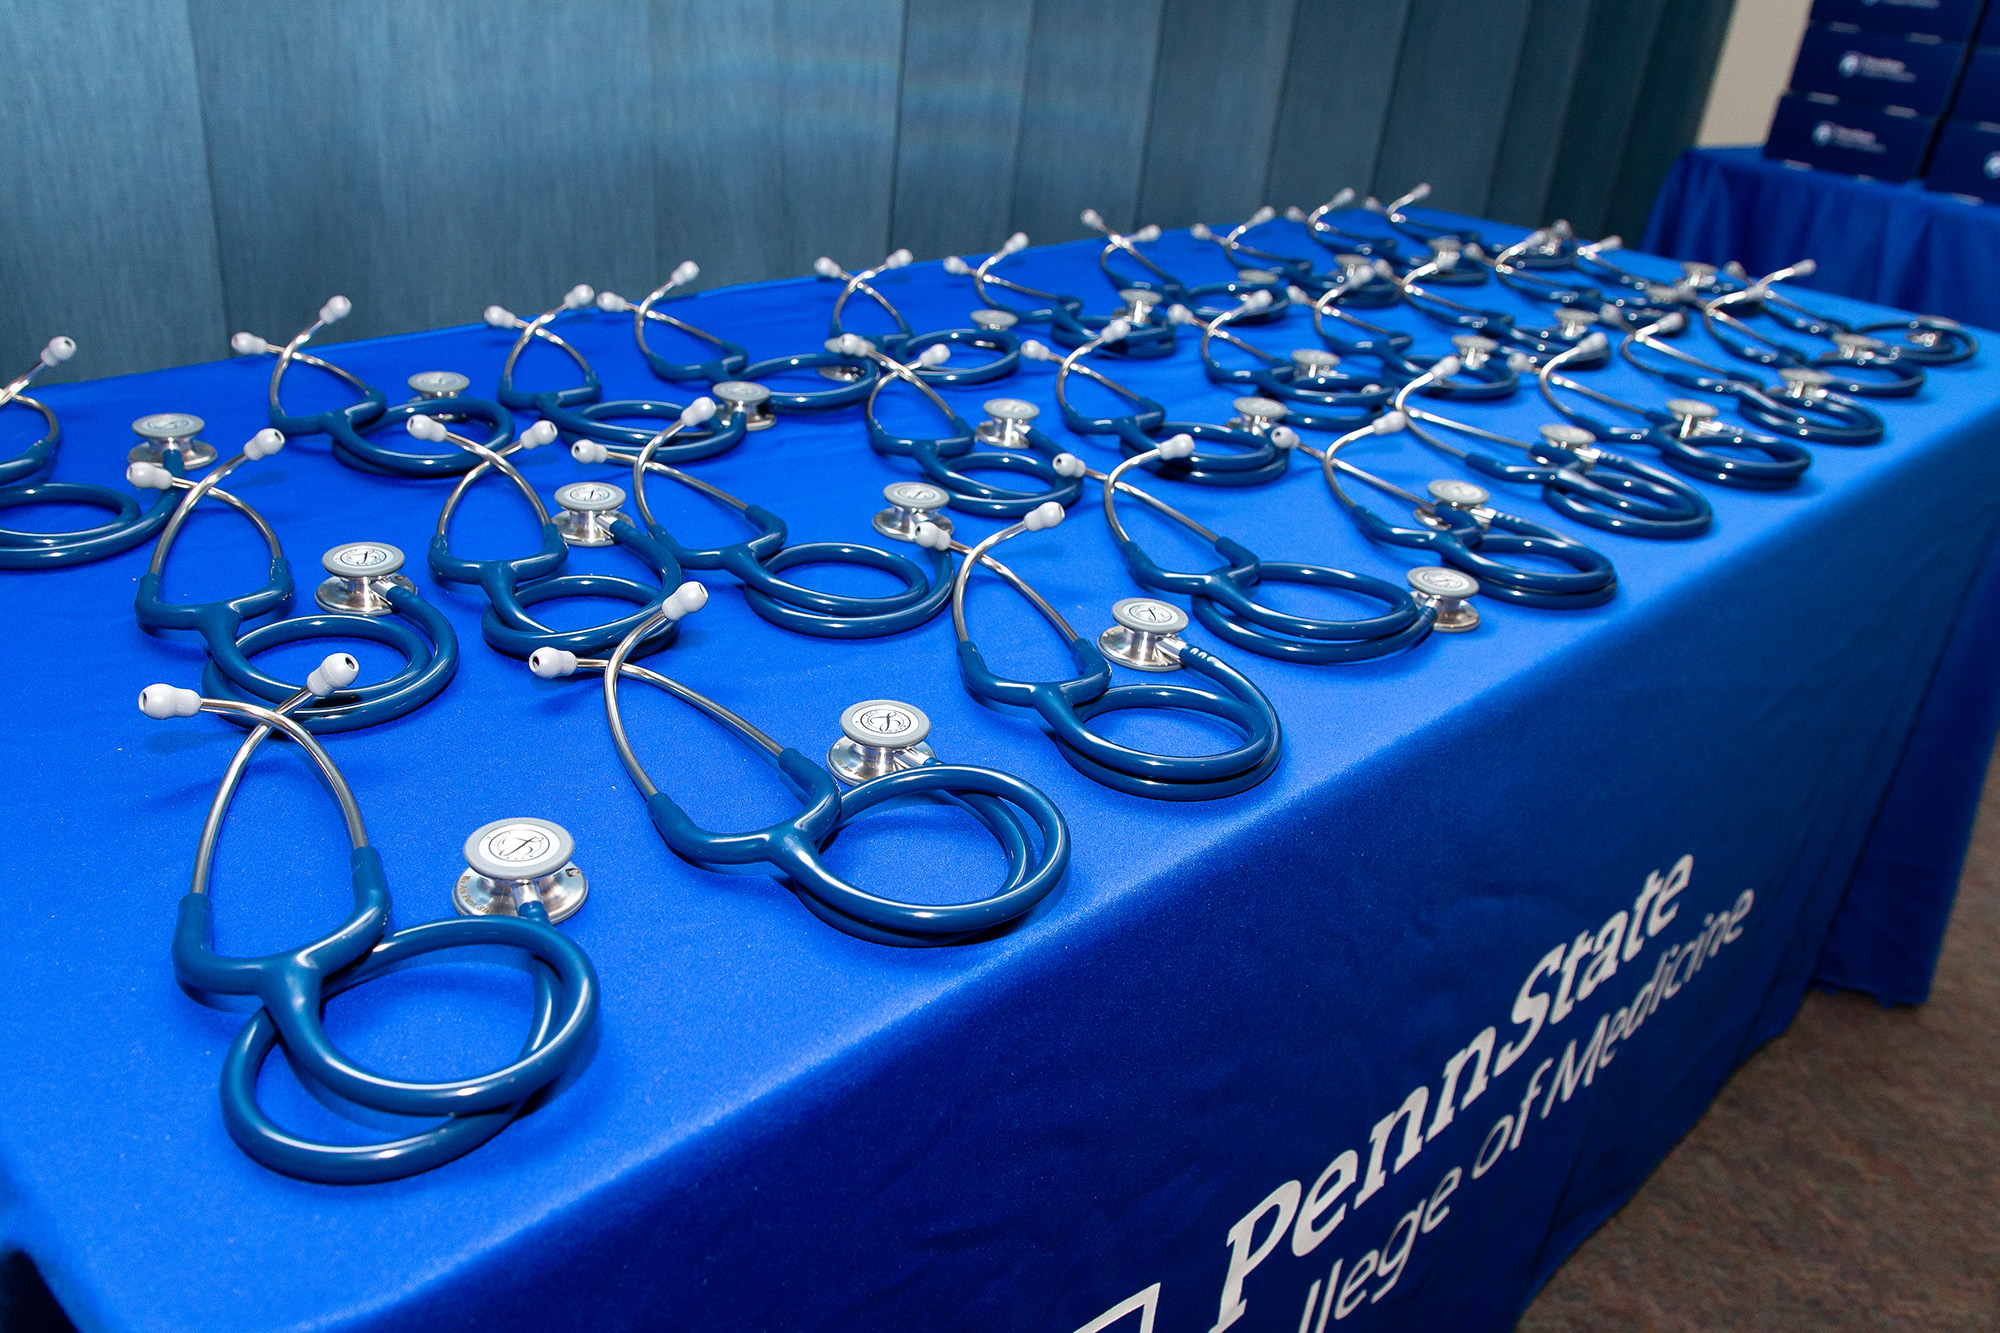 Stethoscopes on a table with a tablecloth that says Penn State College of Medicine